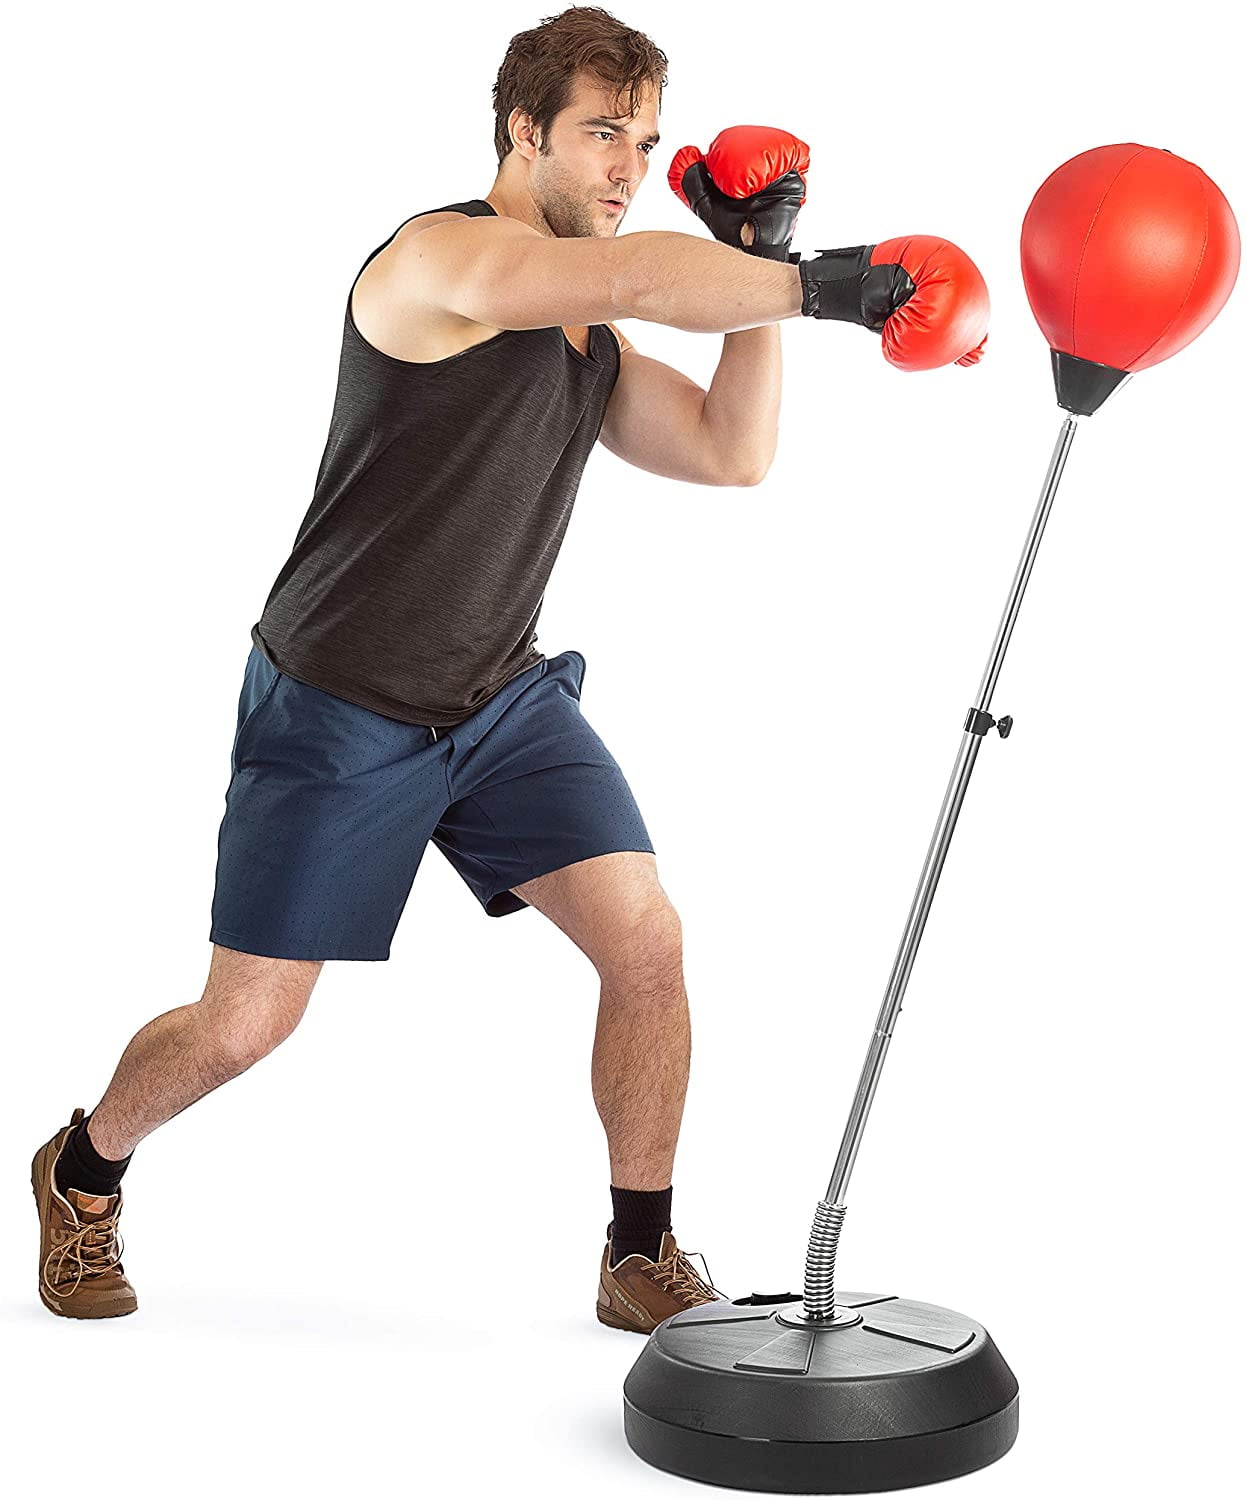 Adjustable Adult Boxing Punch Ball Speed Training Sandbag Stand+Glove Gift 